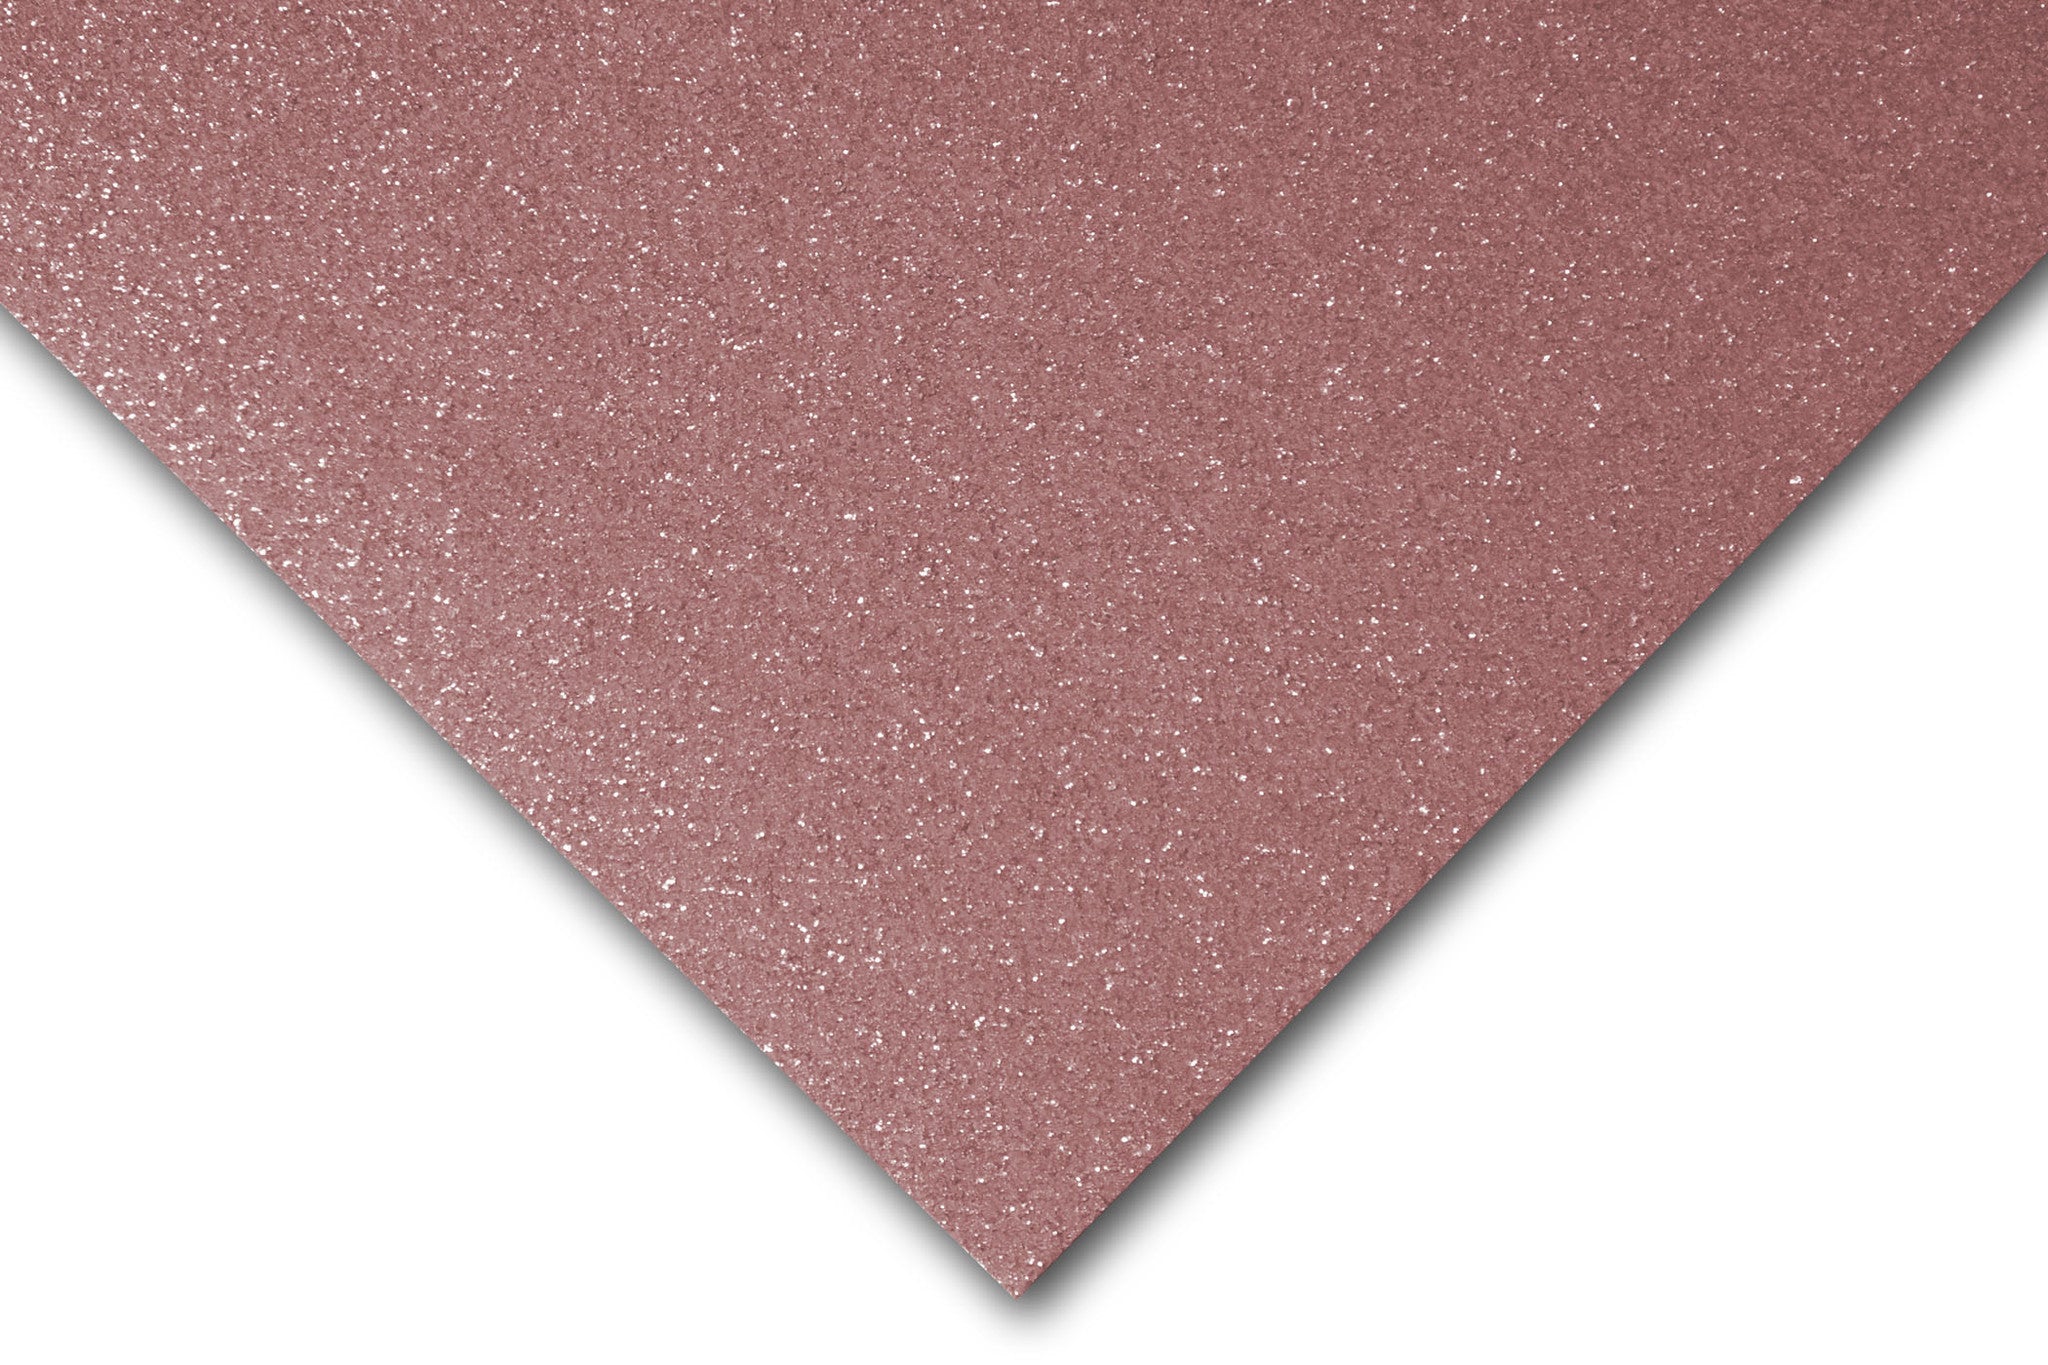 Glitter Cardstock Hot Pink 12 x 12 81# Cover Sheets Bulk Pack of 15